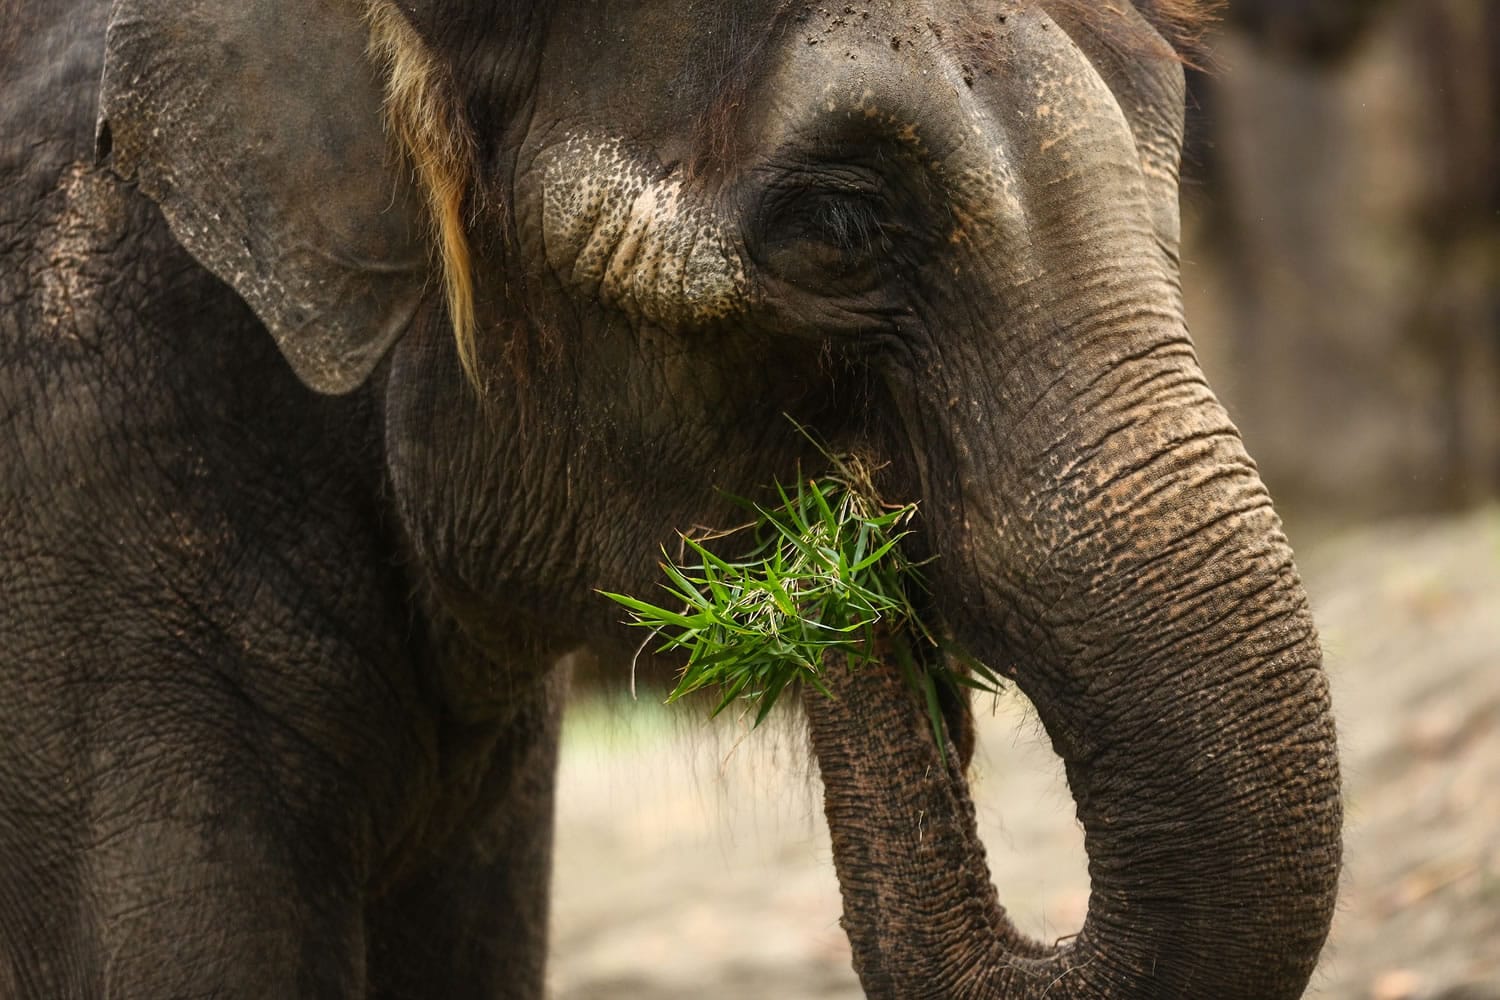 Asian elephant Chai eats grass at the Woodland Park Zoo after the zoo announced that its two elephants will go on long-term loan to the Oklahoma City Zoo, Friday, Feb. 27, 2015, in Seattle.